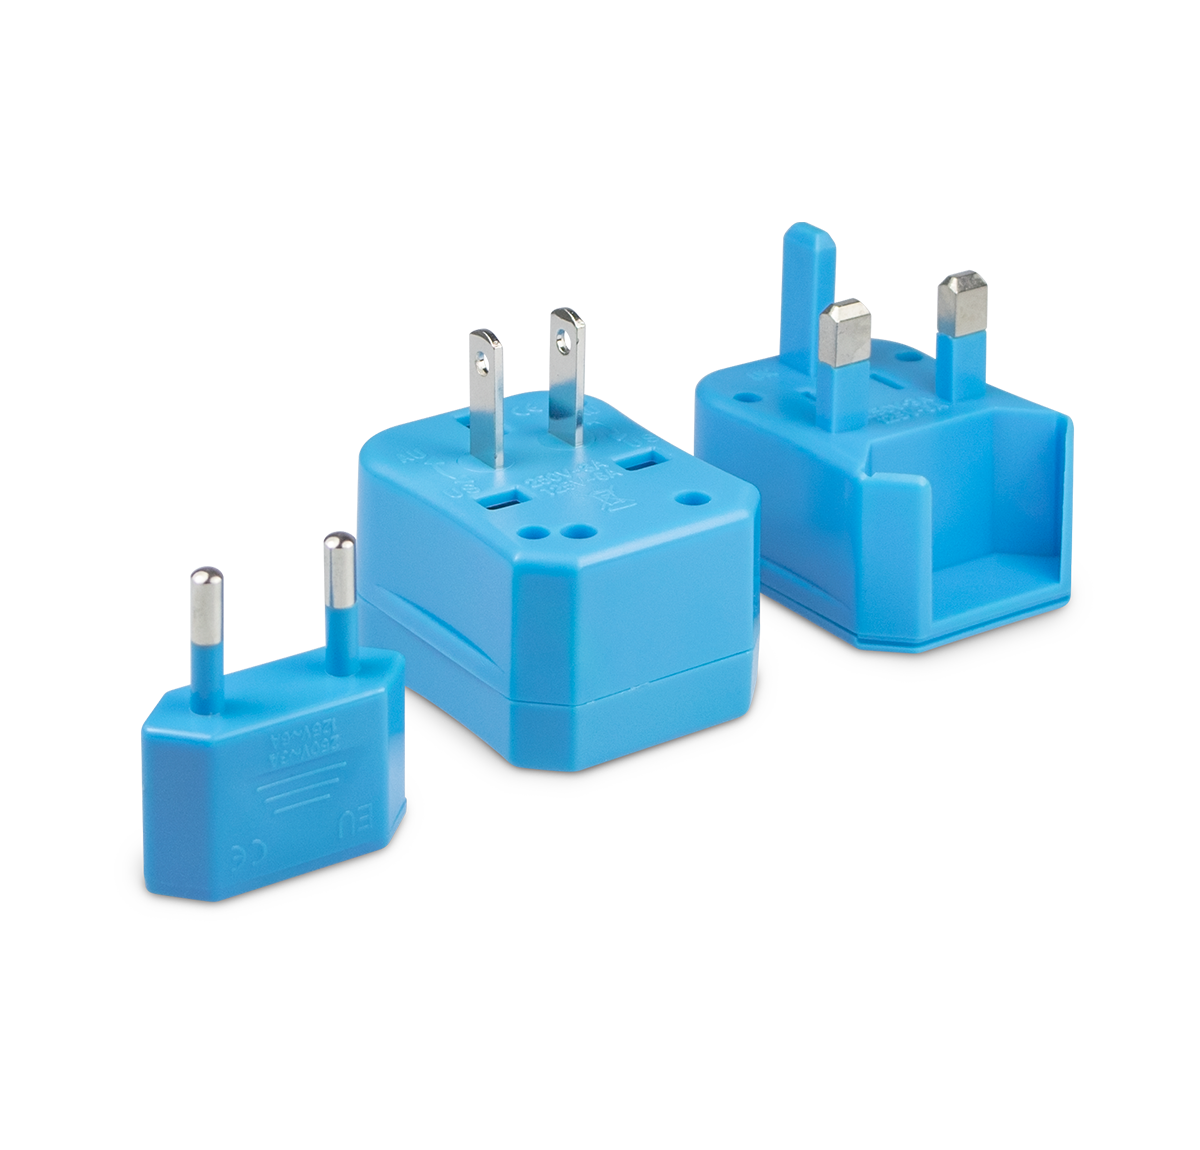 Three pieces of the universal travel adapter. This travel plug adapter is Blue. The World Traveler Travel Adapter is the perfect compact travel adapter to charge your tech on-the-go.